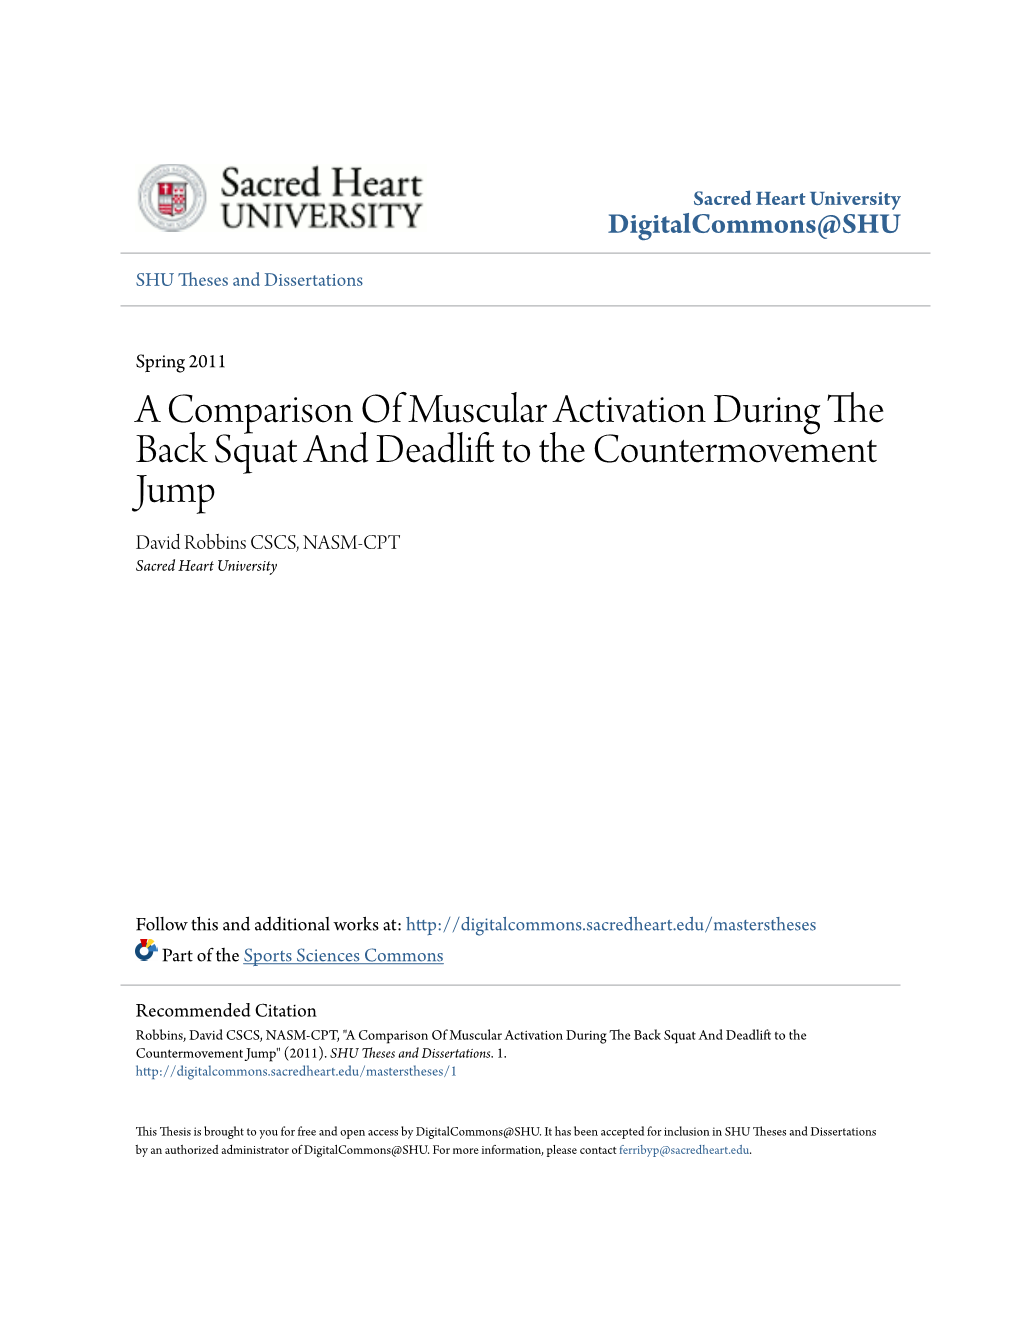 A Comparison of Muscular Activation During the Back Squat and Deadlift Ot the Countermovement Jump David Robbins CSCS, NASM-CPT Sacred Heart University